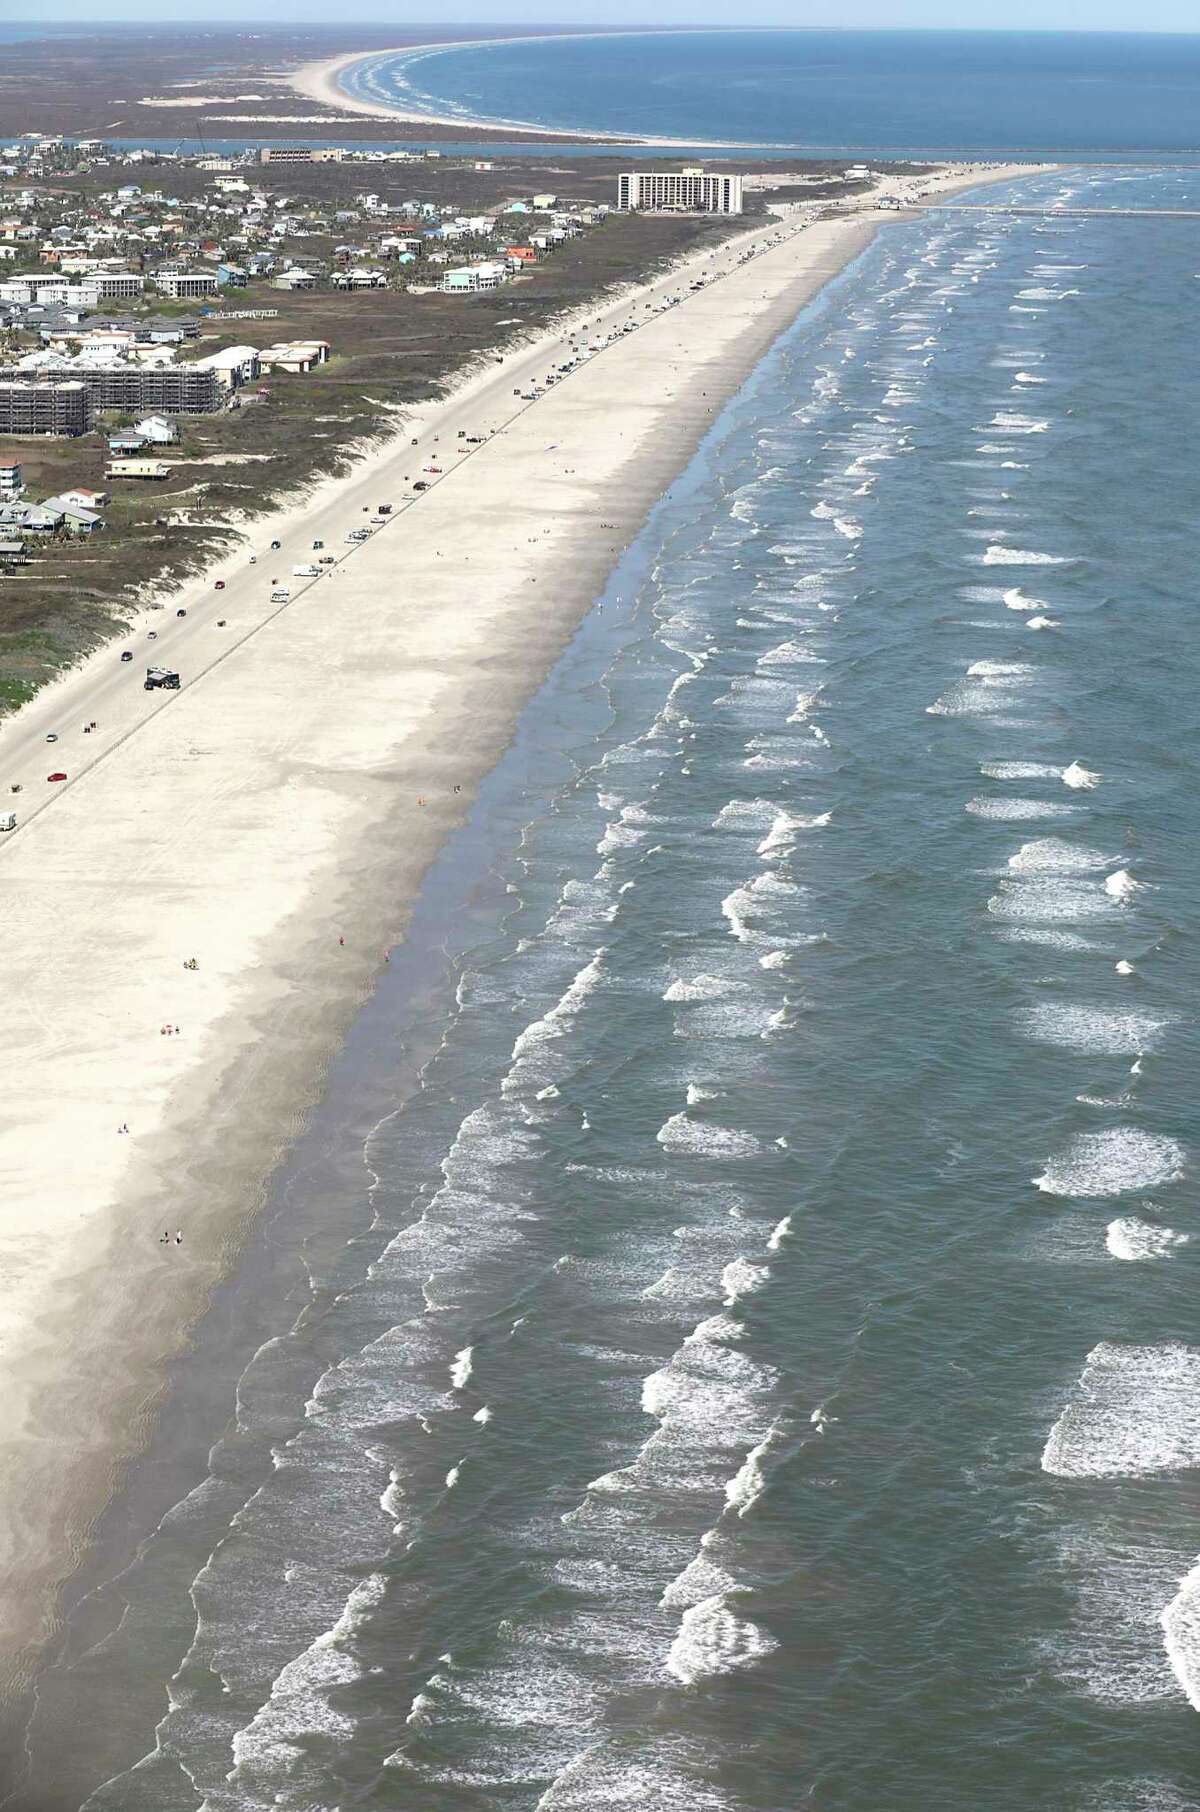 Port Aransas: The beach will be reopen for recreational use on May 1, according to a Tuesday update on the city's website.